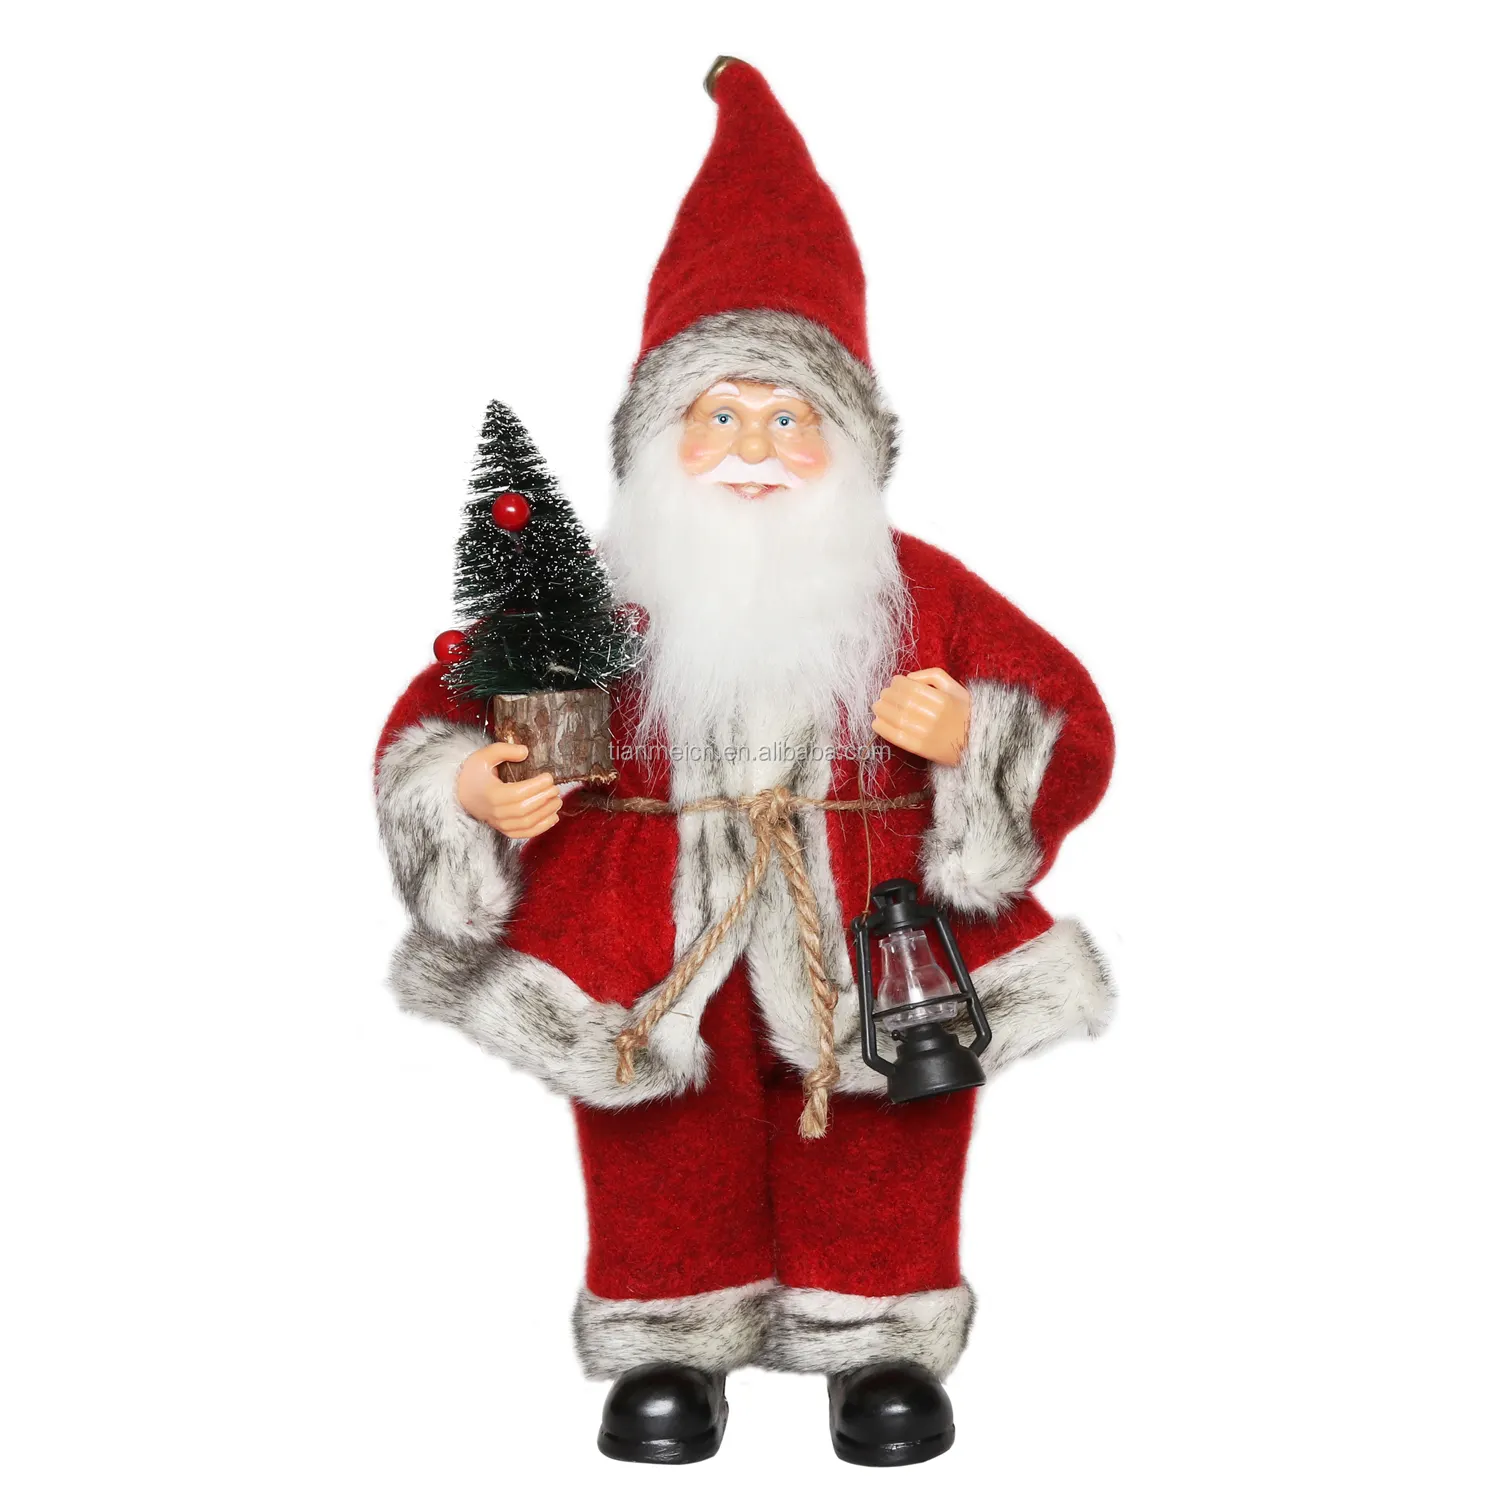 Decor Santa Claus 12"Inch Standing Santa Claus Merry Luxury Xmas Tree Ornament Christmas Decoration Figurine Collection Traditional Holiday Doll